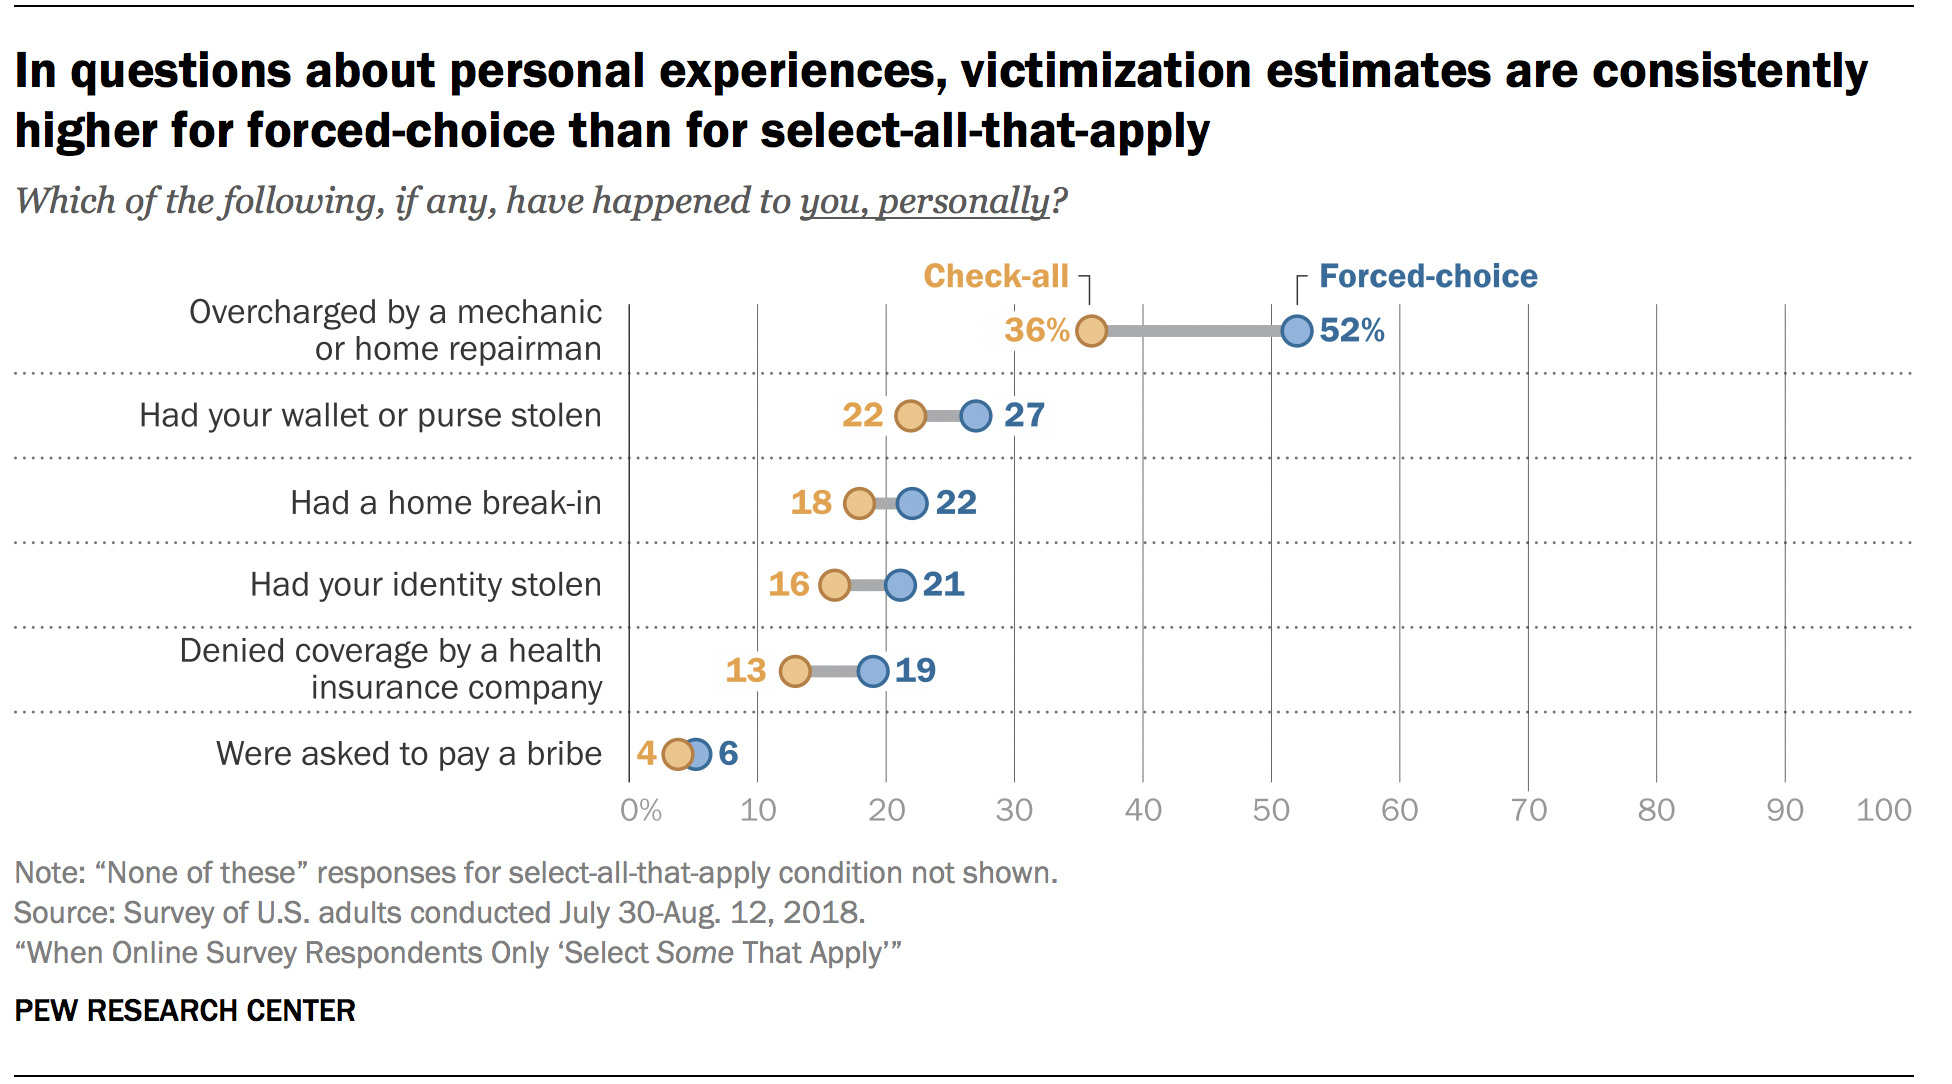 In questions about personal experiences, victimization estimates are consistently higher for forced-choice than for select-all-that-apply